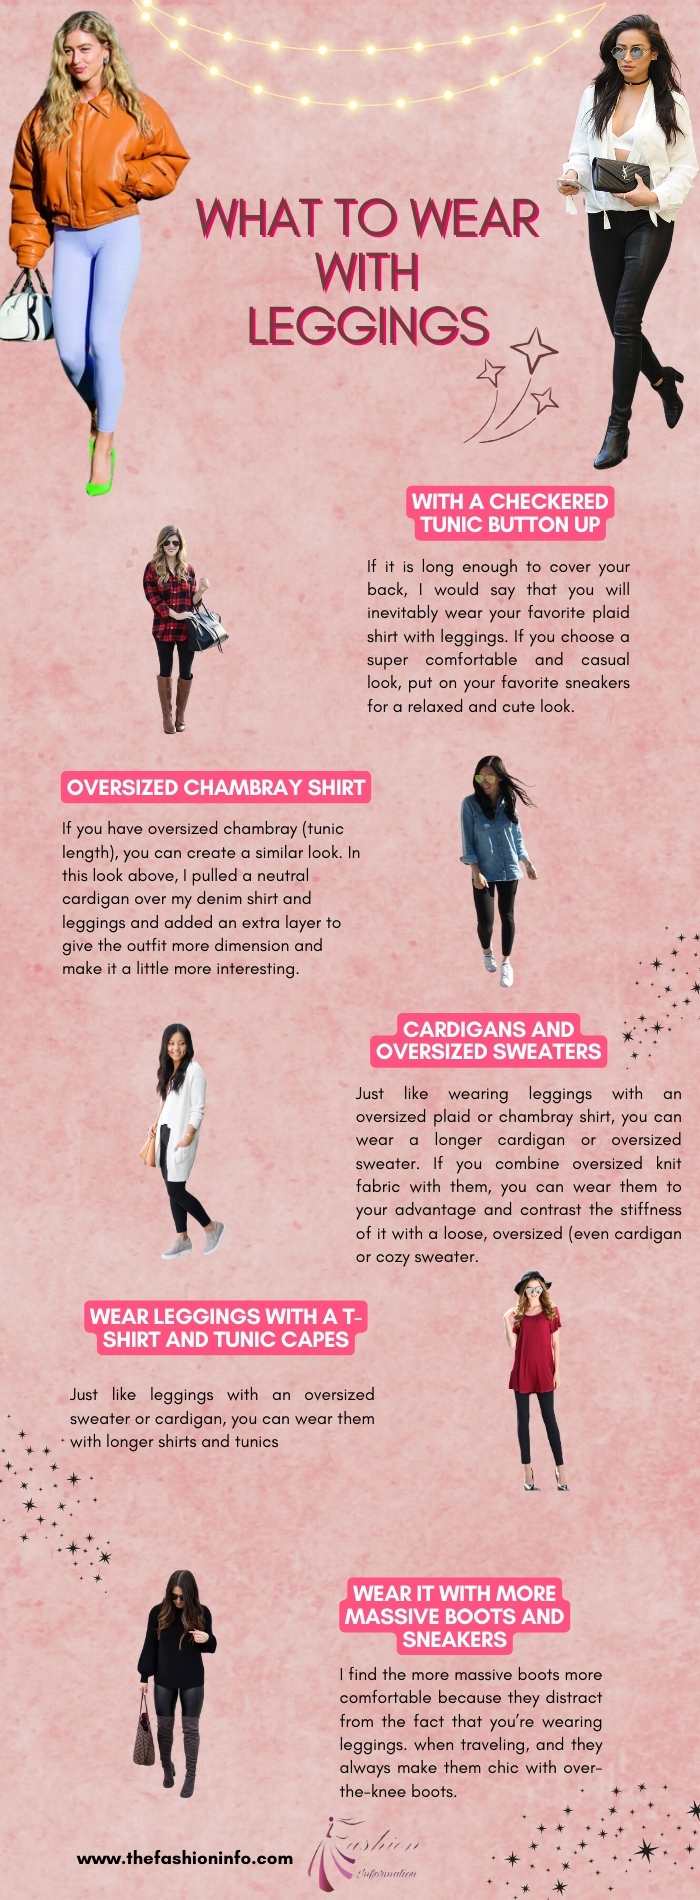 What To Wear With Leggings 